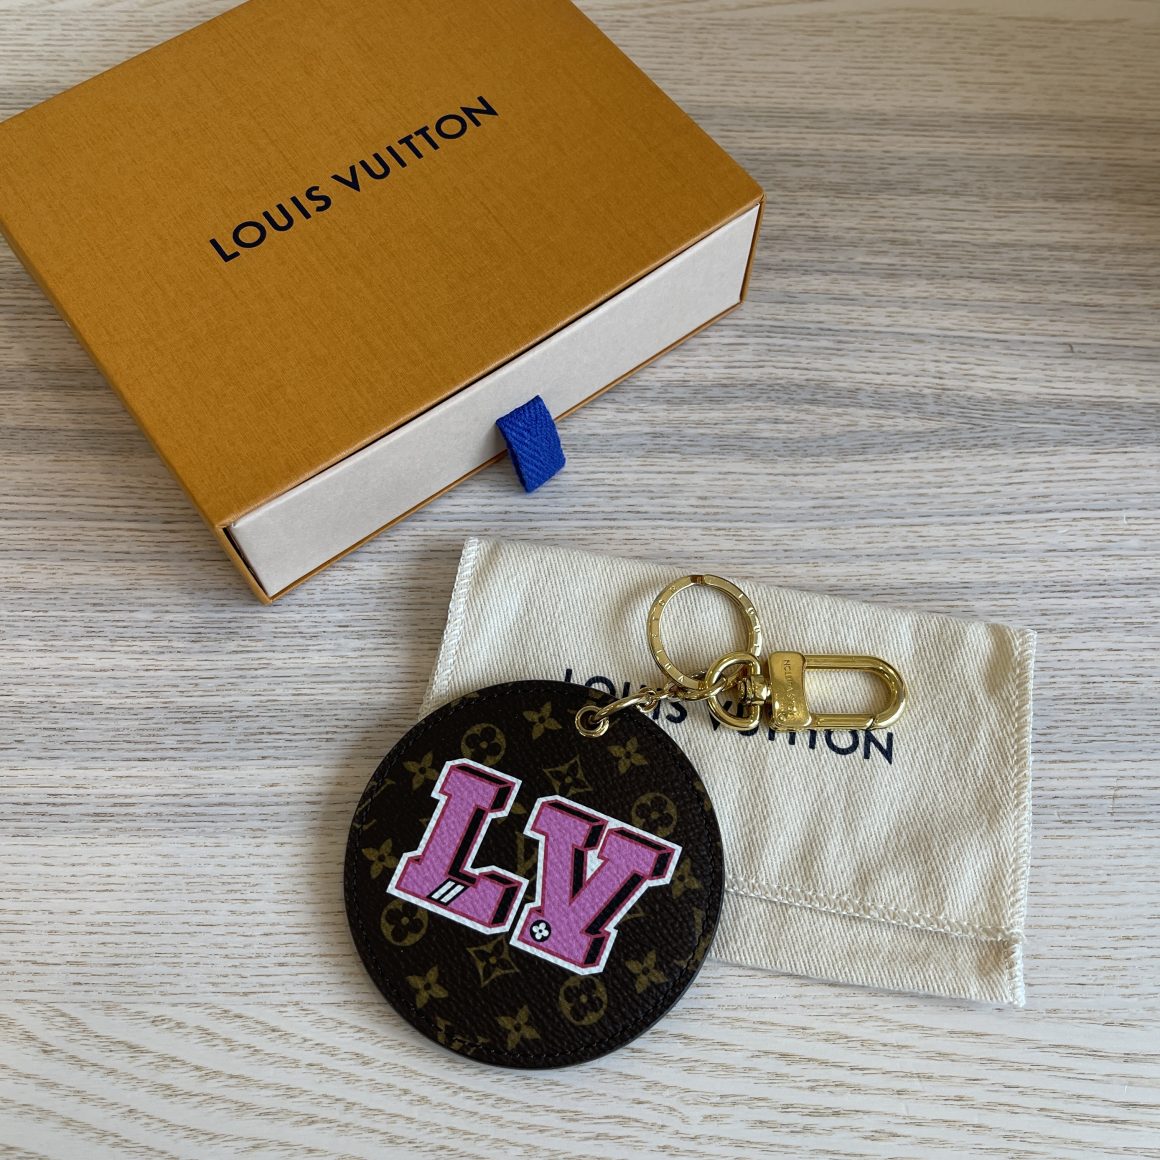 Louis Vuitton Monogram Mirror Key Holder and Bag Charm - Pink Keychains,  Accessories - LOU773888